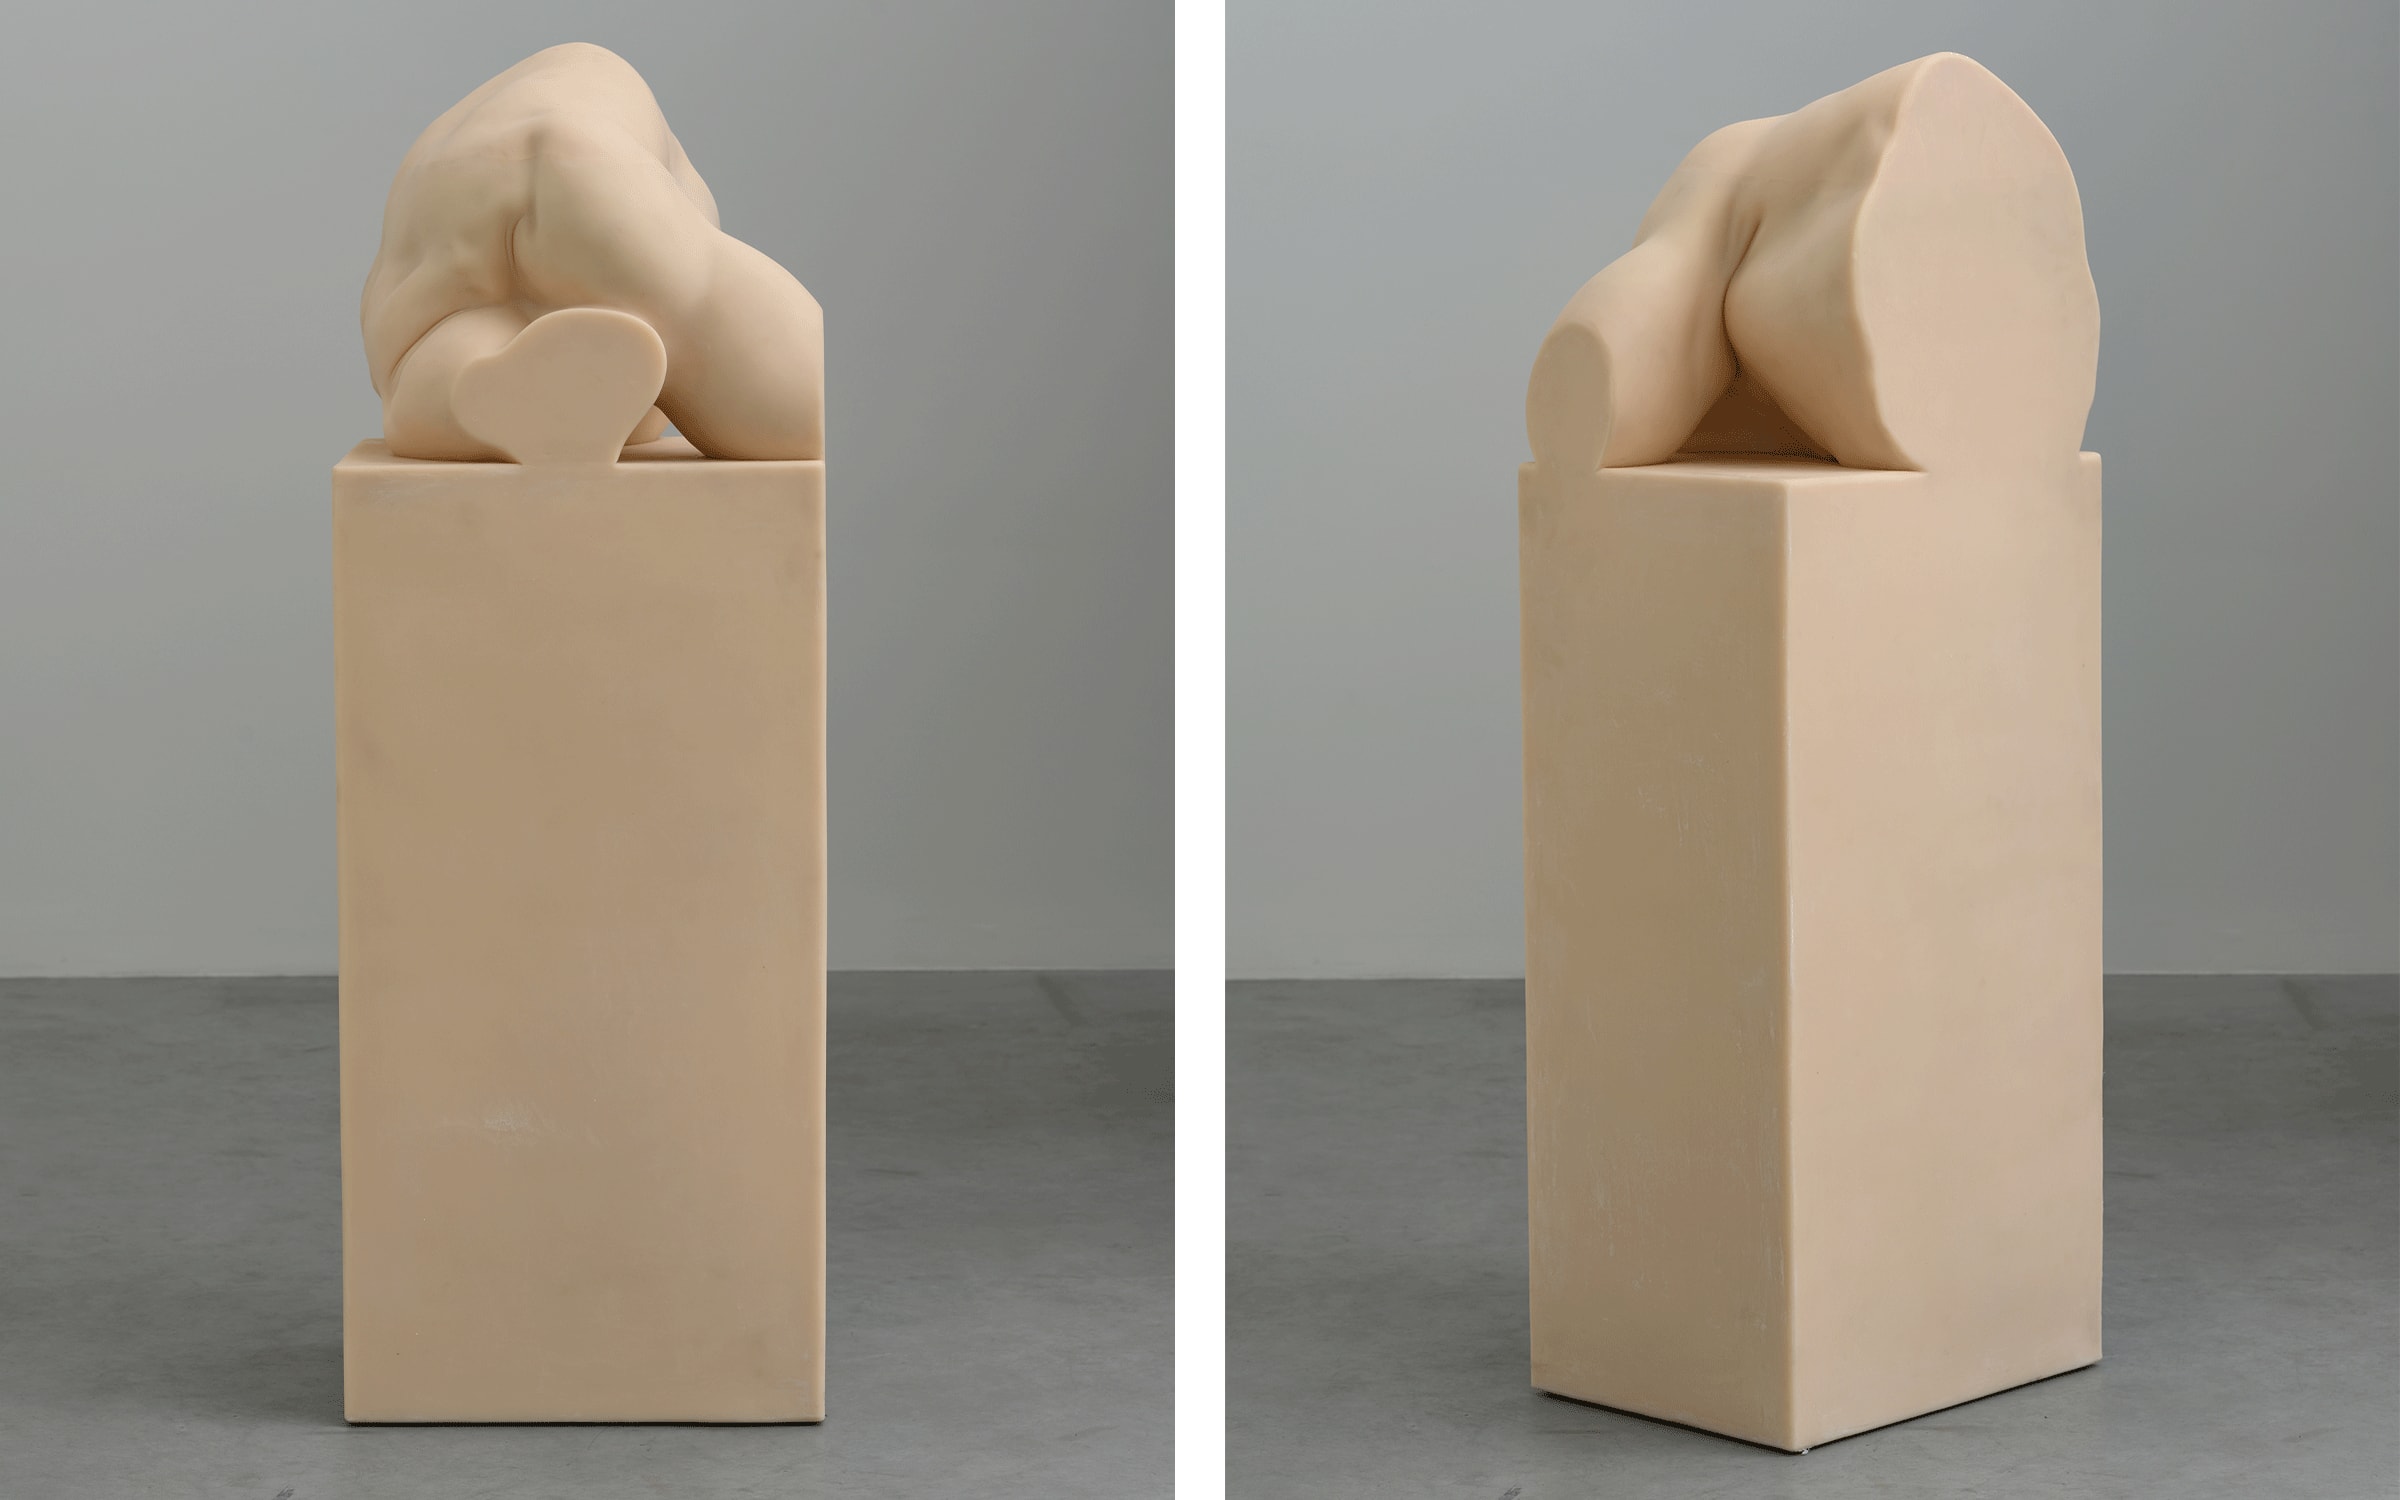 Martin Margiela, Torso III (pale), 2018-2021, edition 2 of 3. Photograph by Peter Cox. Courtesy of the artist and Zeno X Gallery (Antwerp).